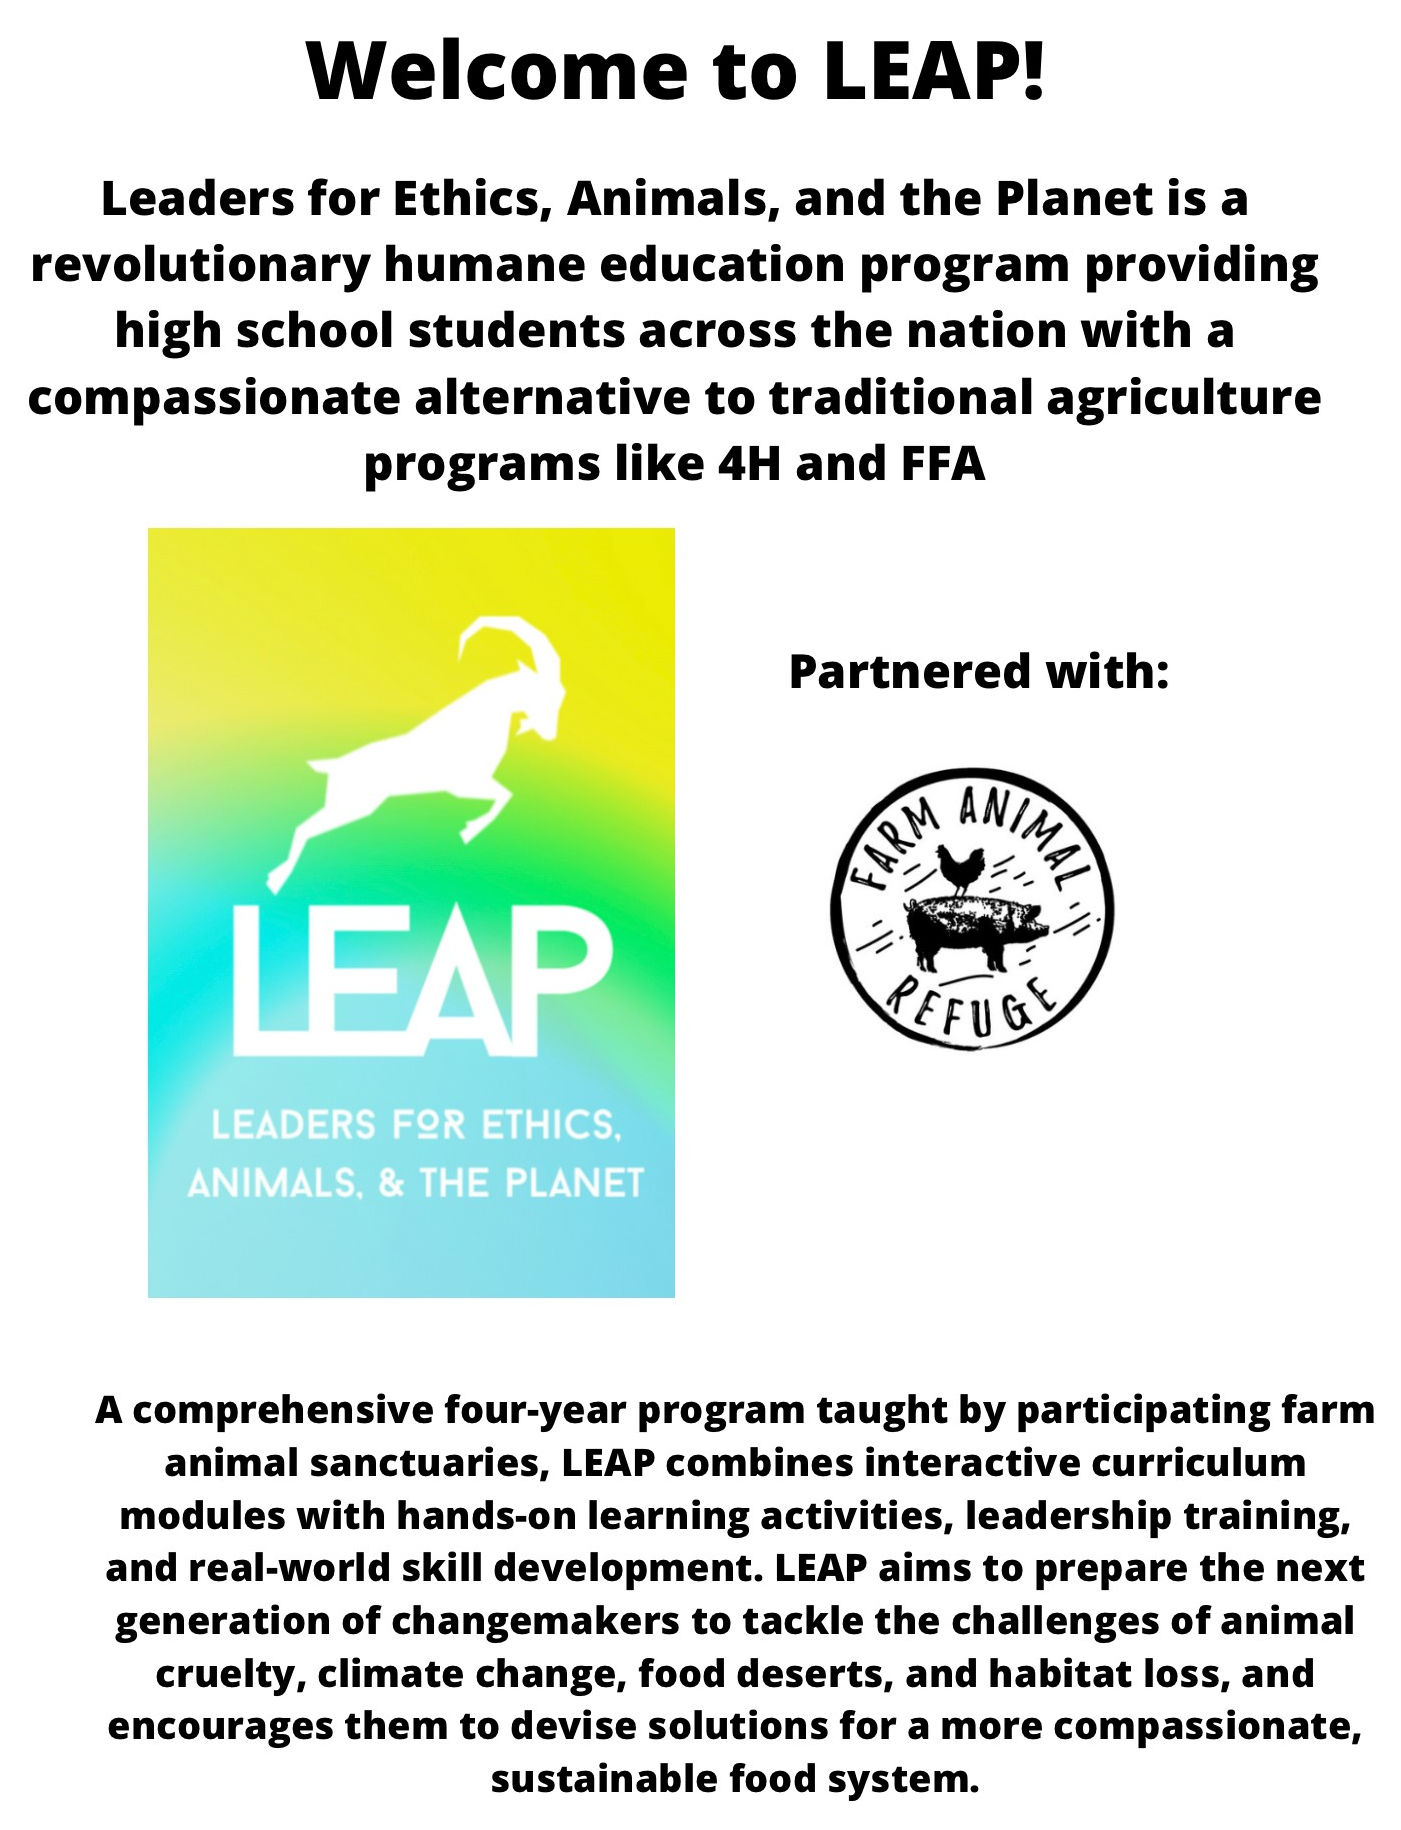 Official Release for the LEAP Program